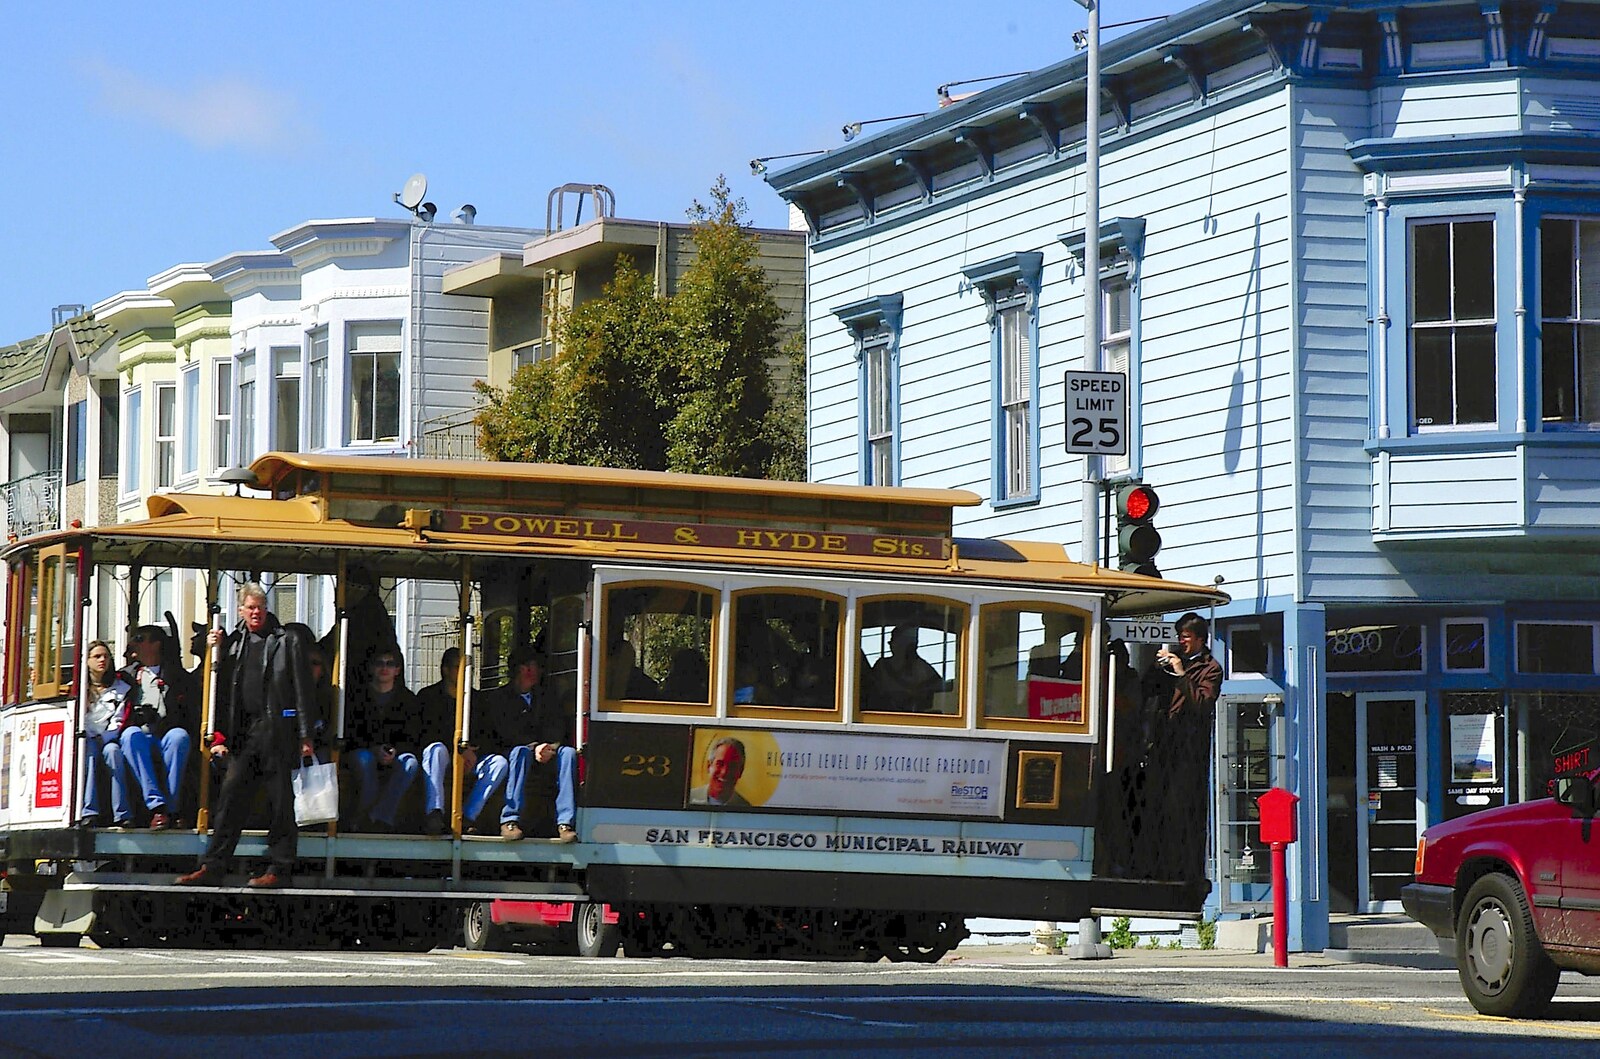 Another tram from Chinatown, Telegraph Hill and Fisherman's Wharf, San Francisco, California, US - 11th March 2006